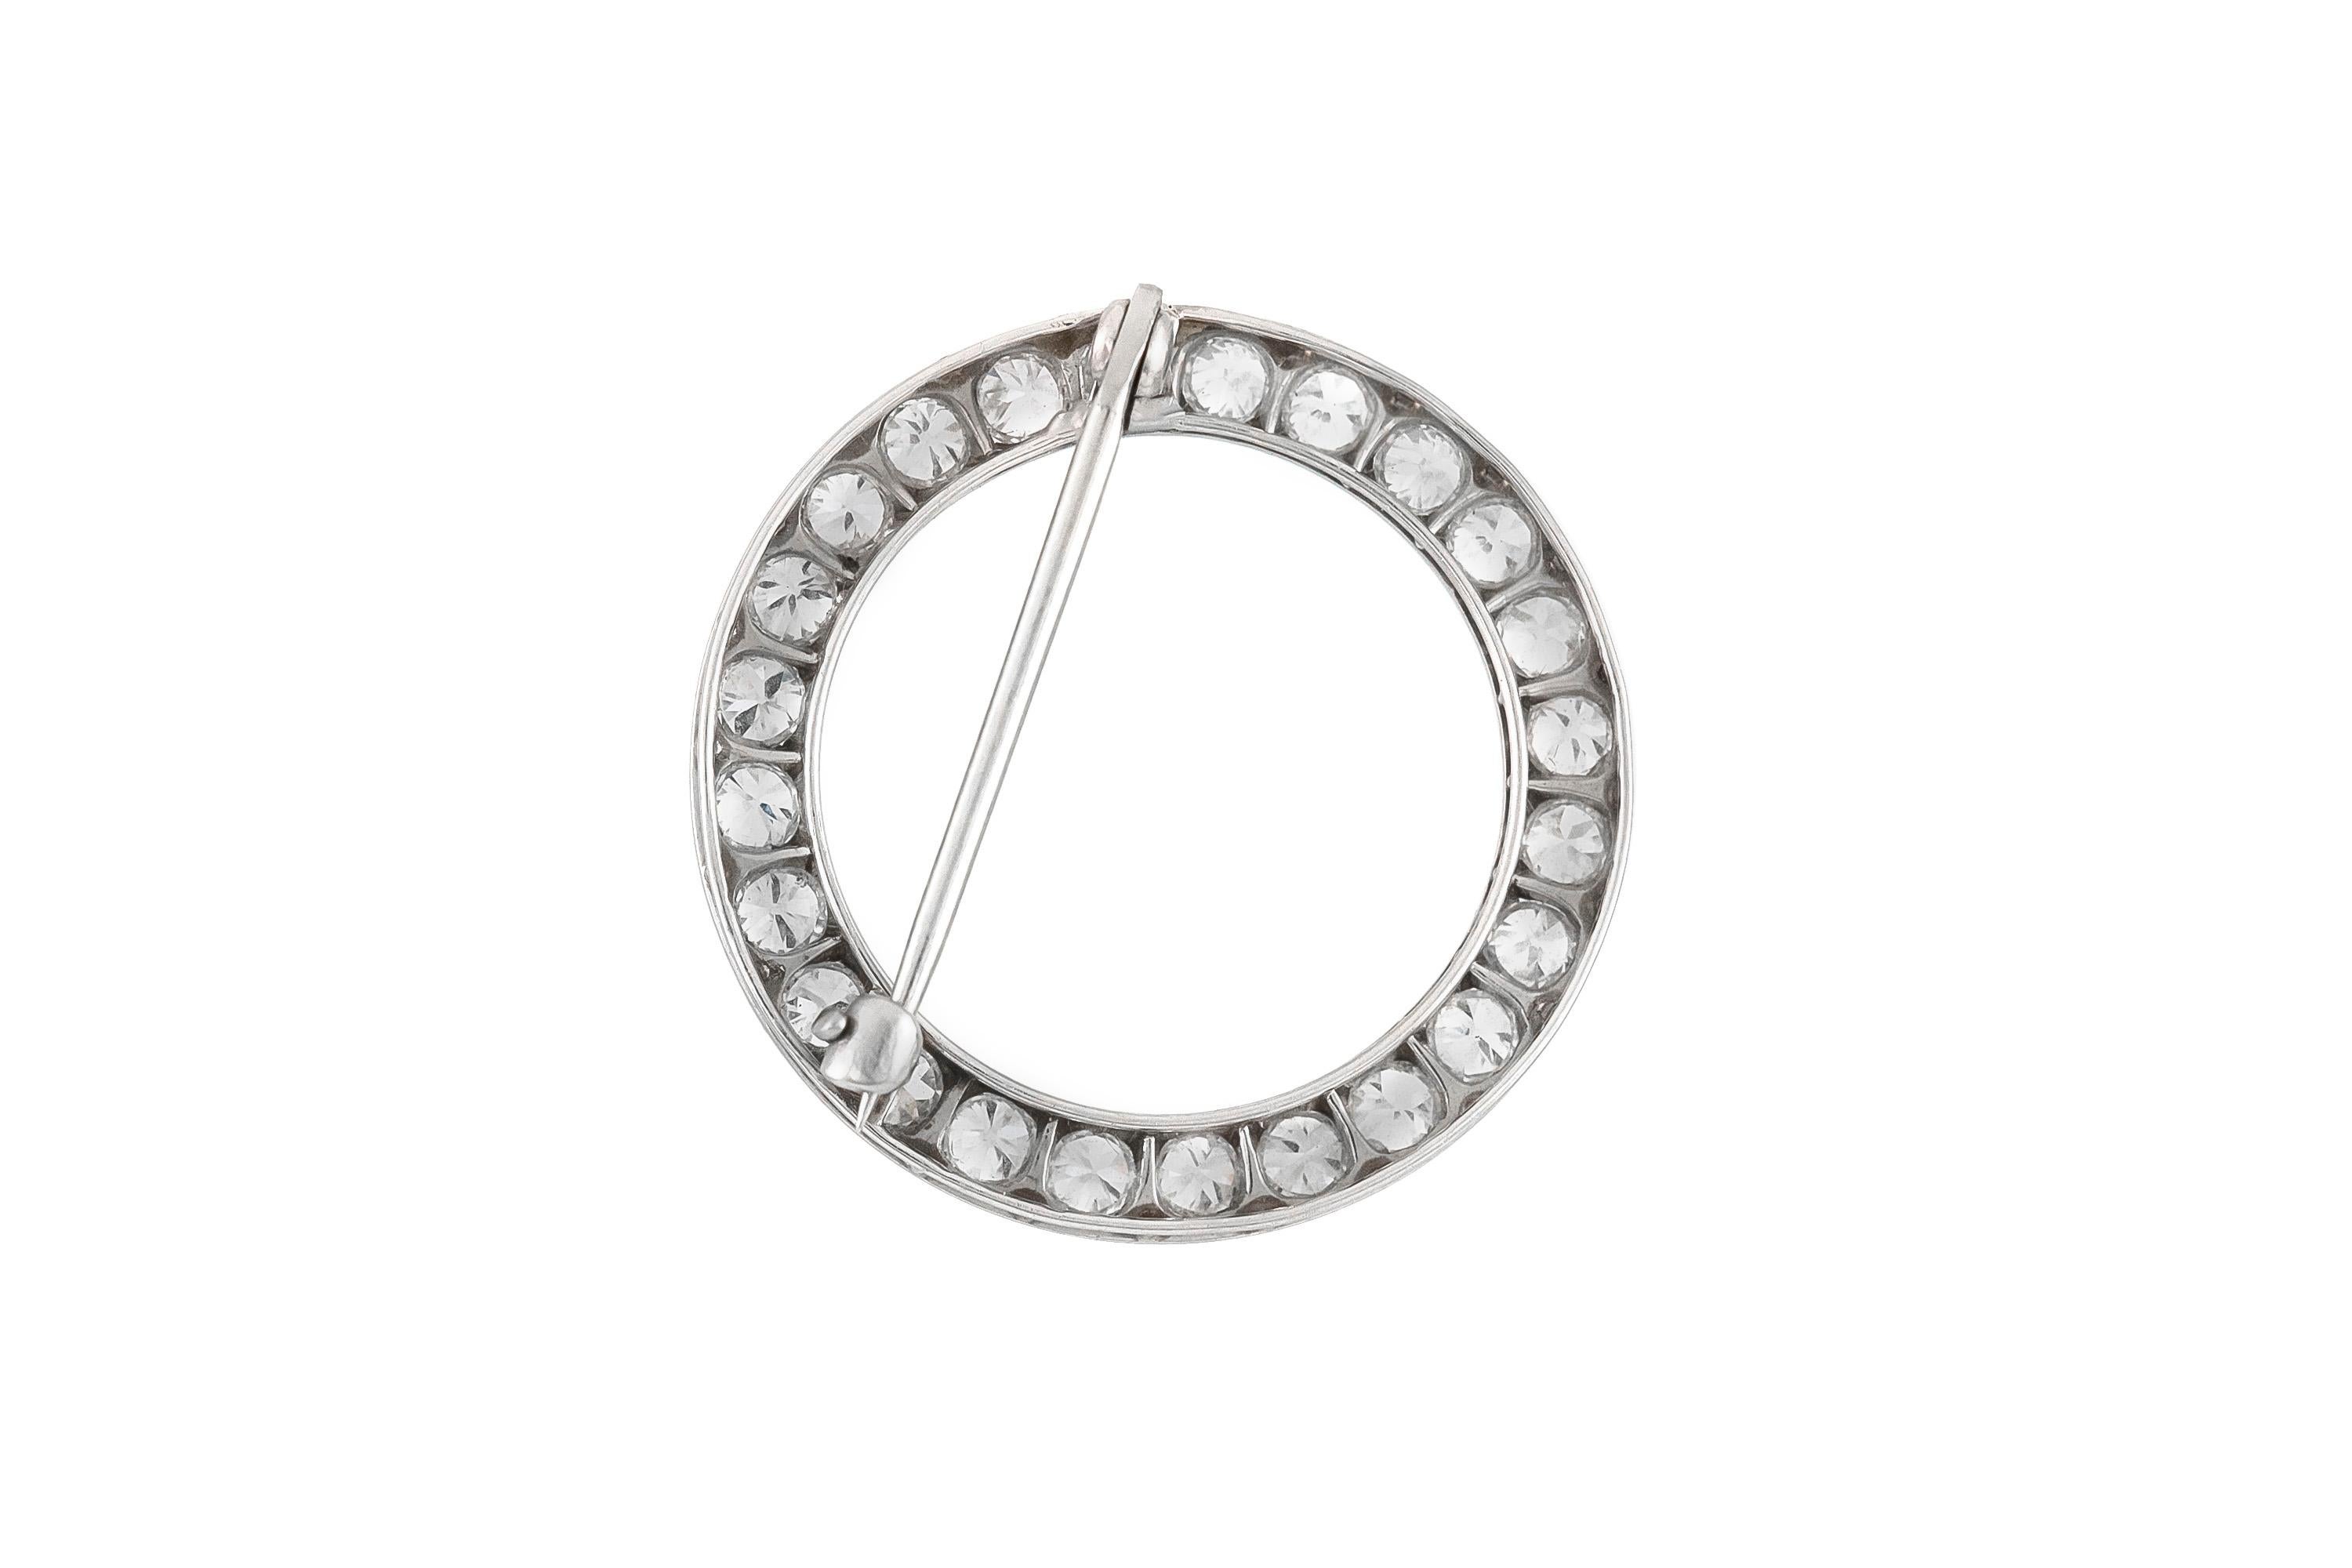 The pendant is finely crafted in platinum with diamonds weighing approximately total of 4.00 carat.
Circa 1930.
